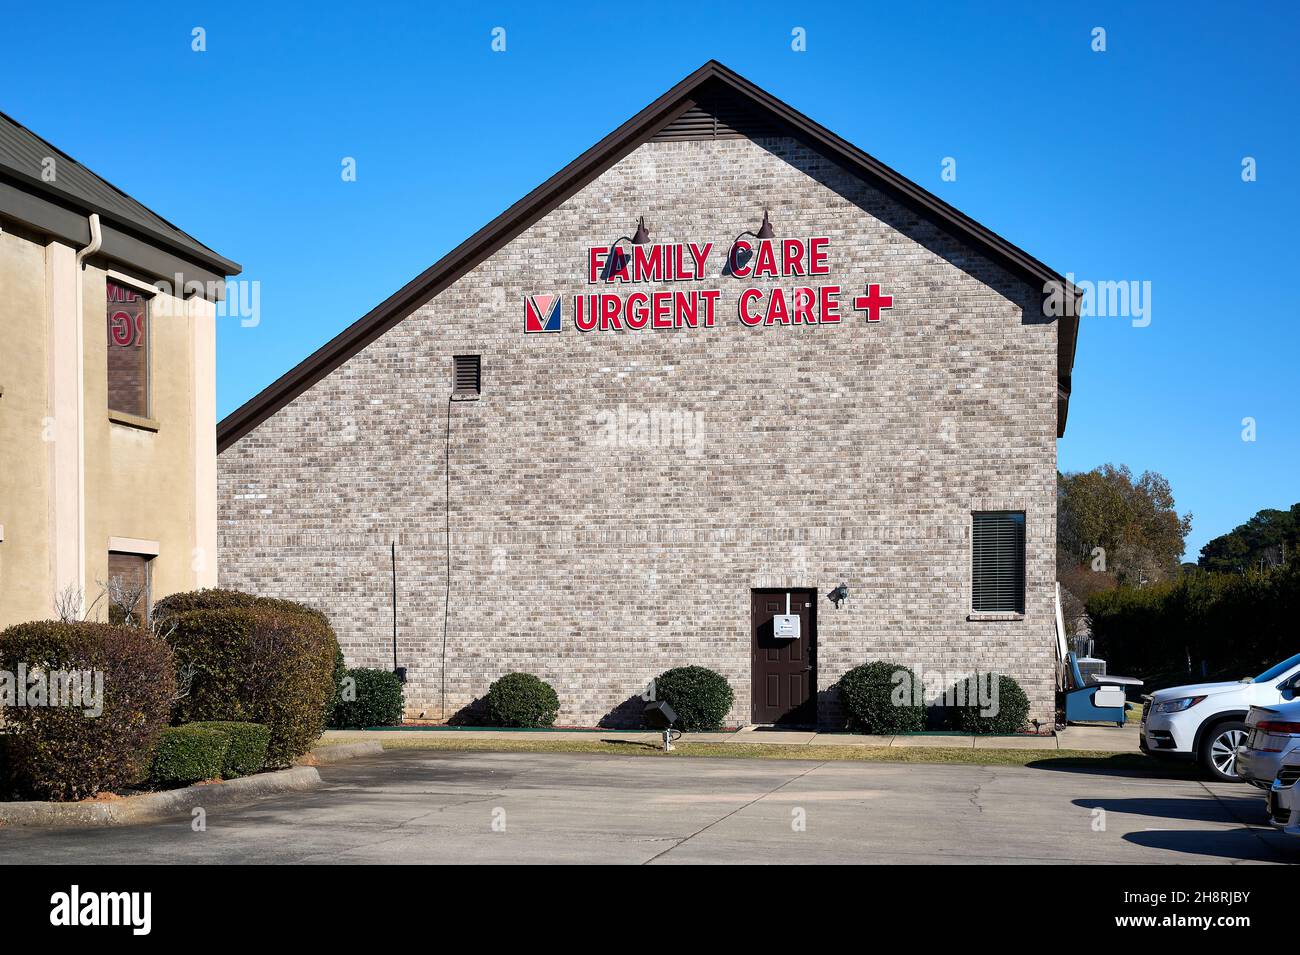 Family care or urgent care doctor's office exterior entrance with sign in Montgomery Alabama, USA. Stock Photo